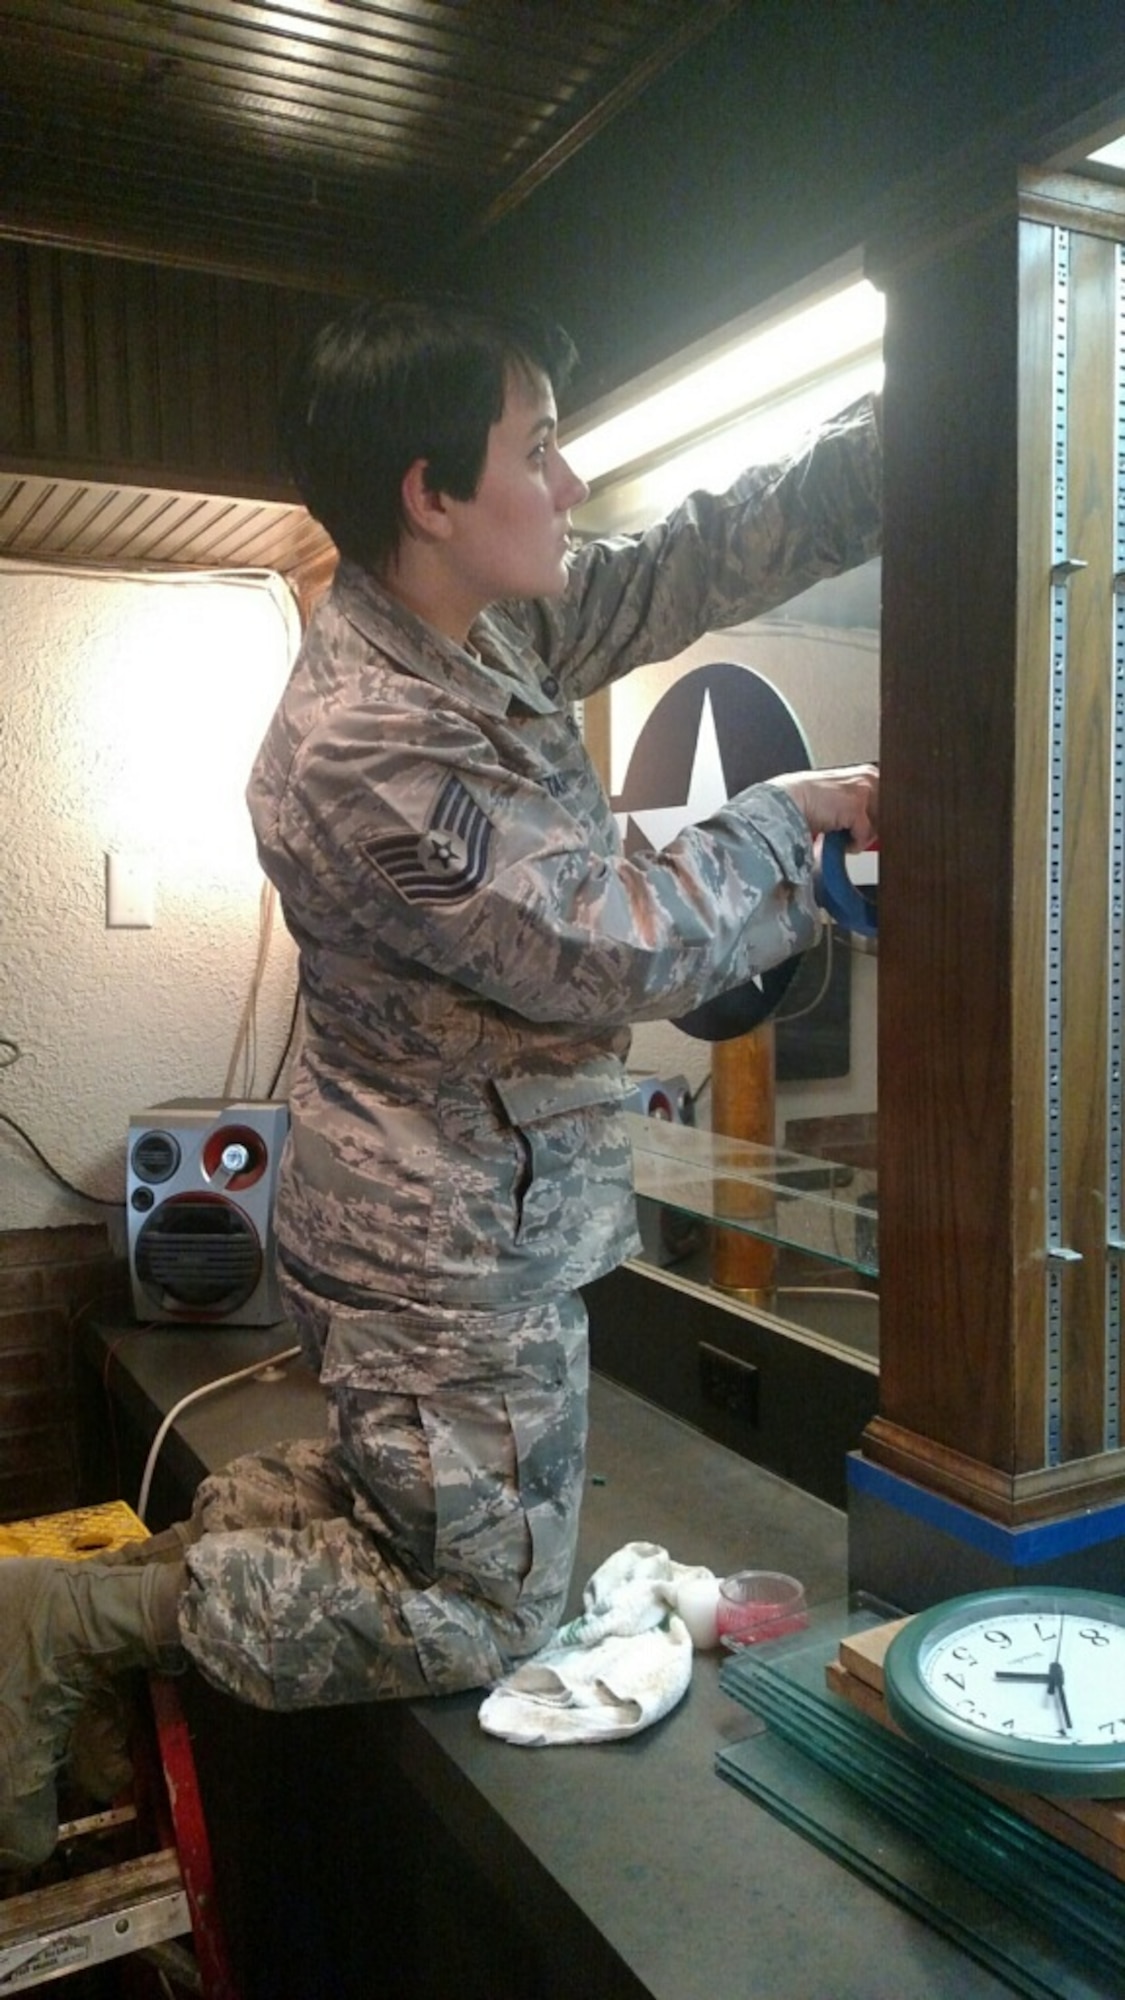 U.S. Air Force Tech. Sgt. Jerrika Stark, 7th Force Support Squadron community services technician, assists in renovations to the Hangar Center bar of Dyess Air Force Base, Texas, Jan. 31, 2017. Having been temporarily assigned to the Legends Café and previously the Longhorn Dining Facility manager, Stark hopes to educate the café with her experience for a successful expansion. (Courtesy photo)